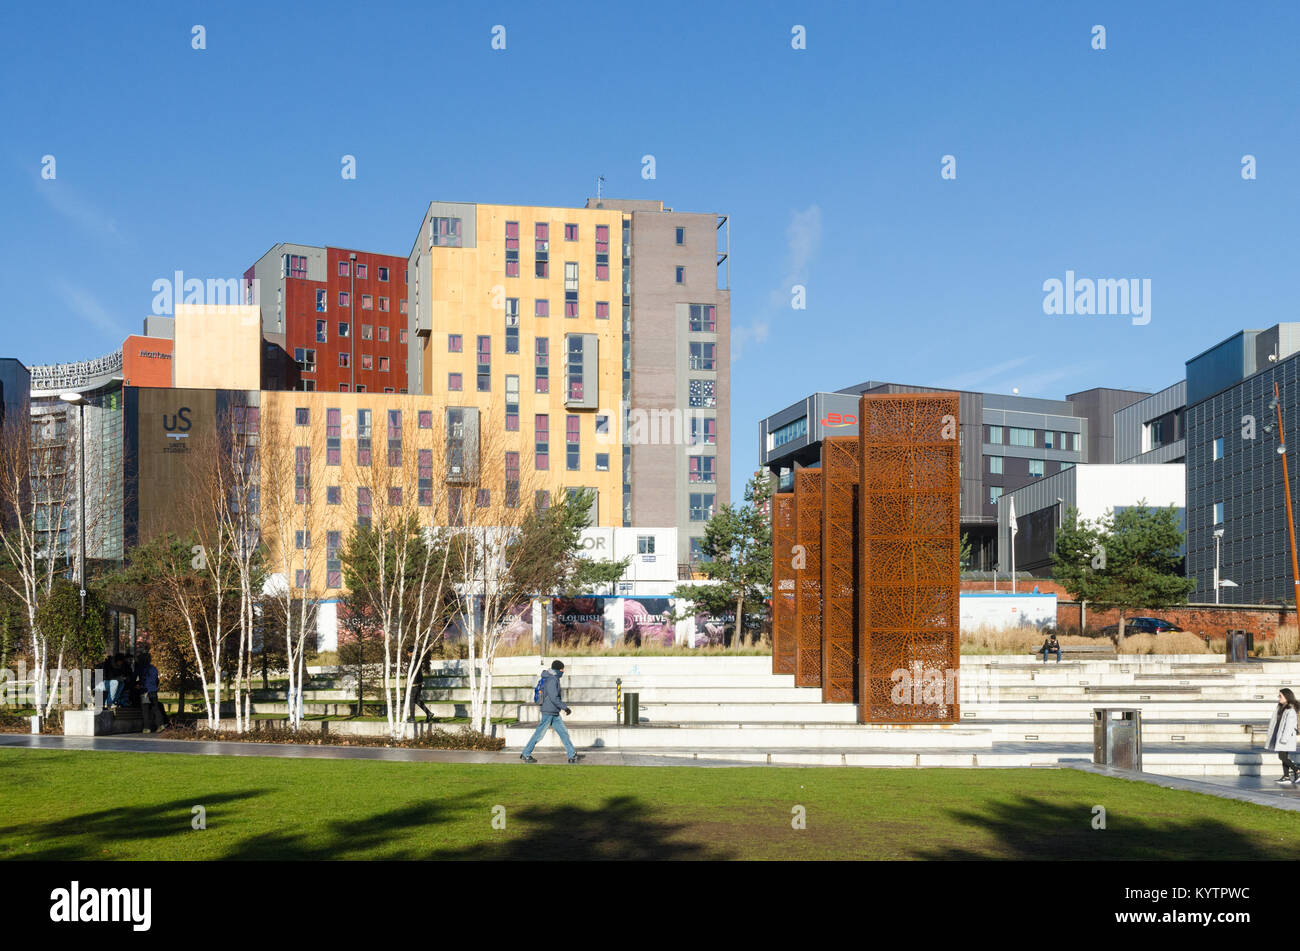 Eastside City Park in Birmingham with Unite student accommodation buildings Stock Photo